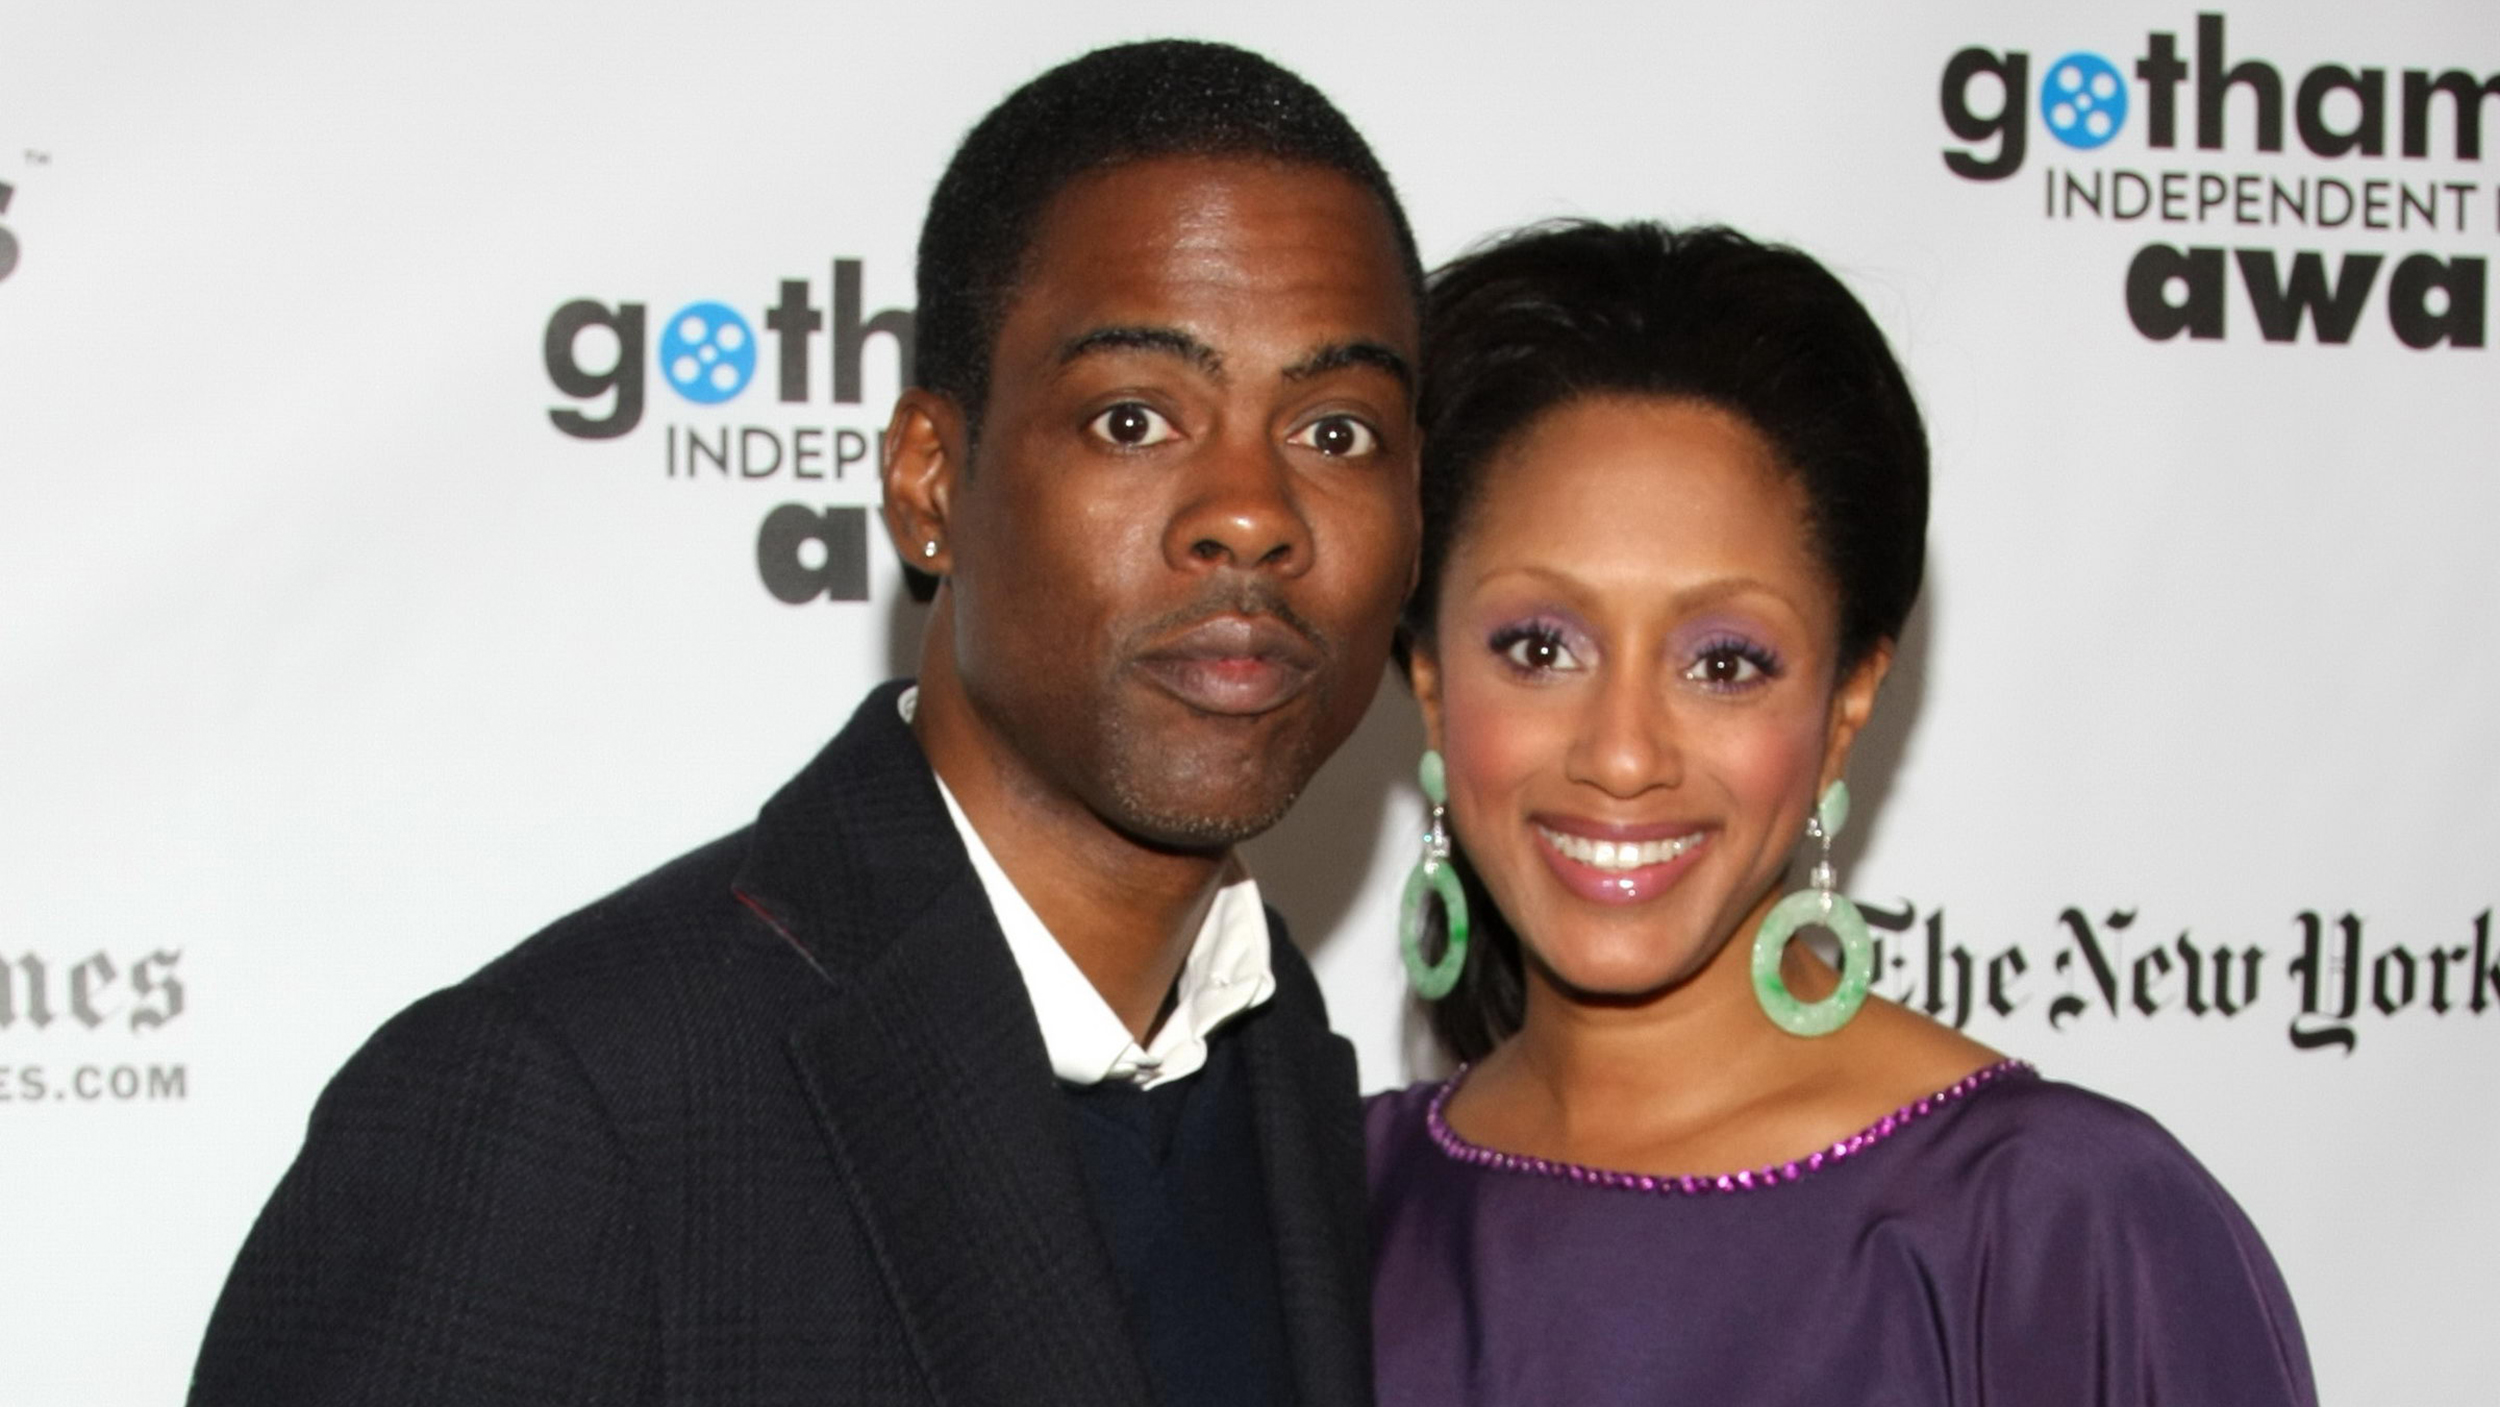 Who is Chris Rock Dating?